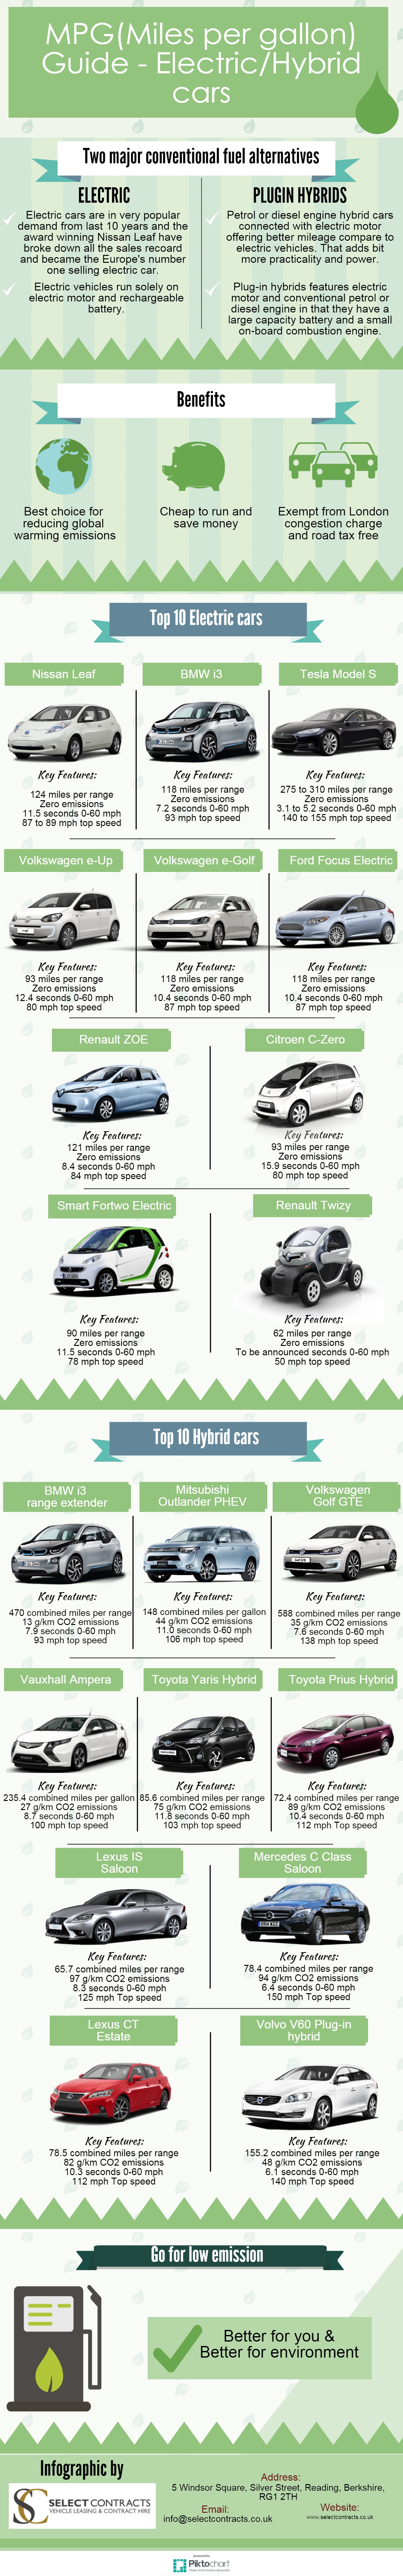 MPG (miles per gallon) guide Electric/Hybrid cars Visual.ly